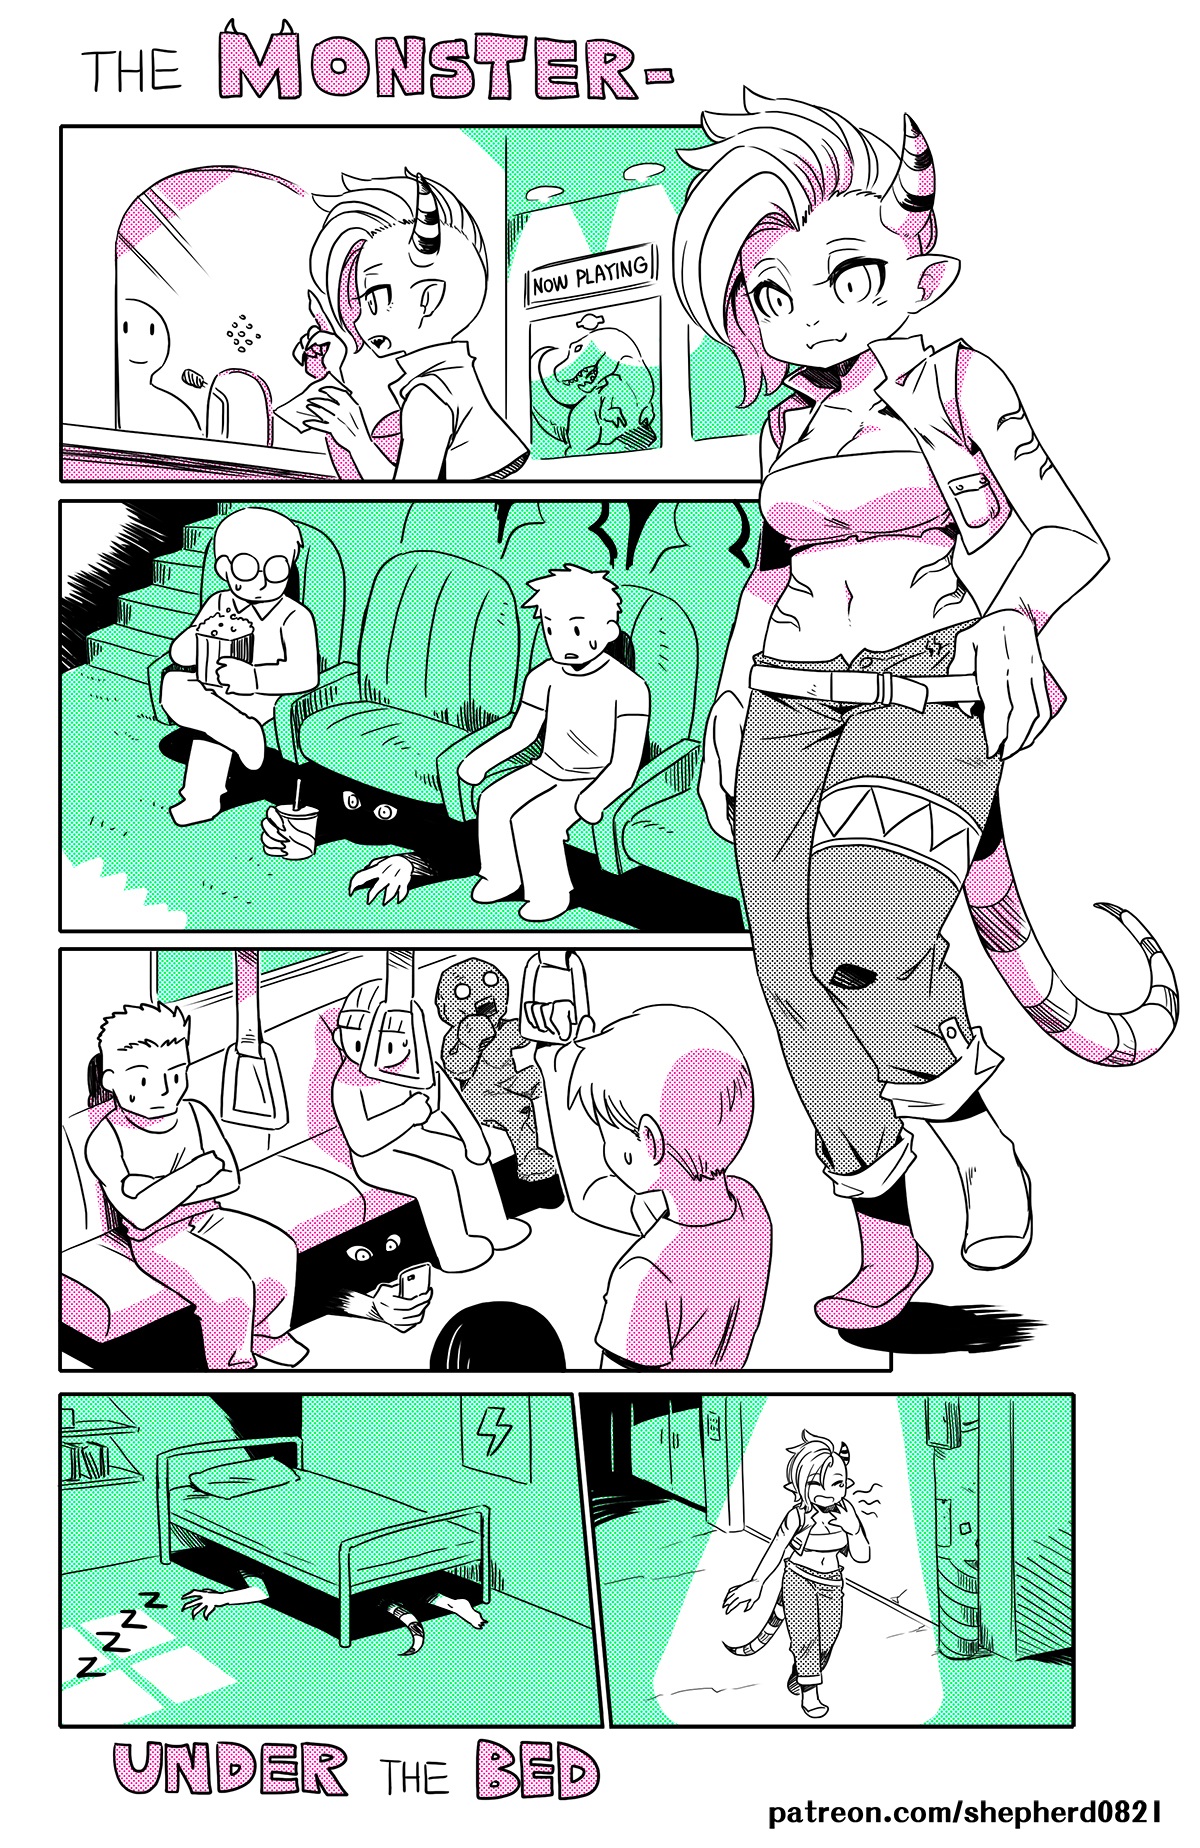 Modern MoGal Ch. 5 The Monster Under the Bed